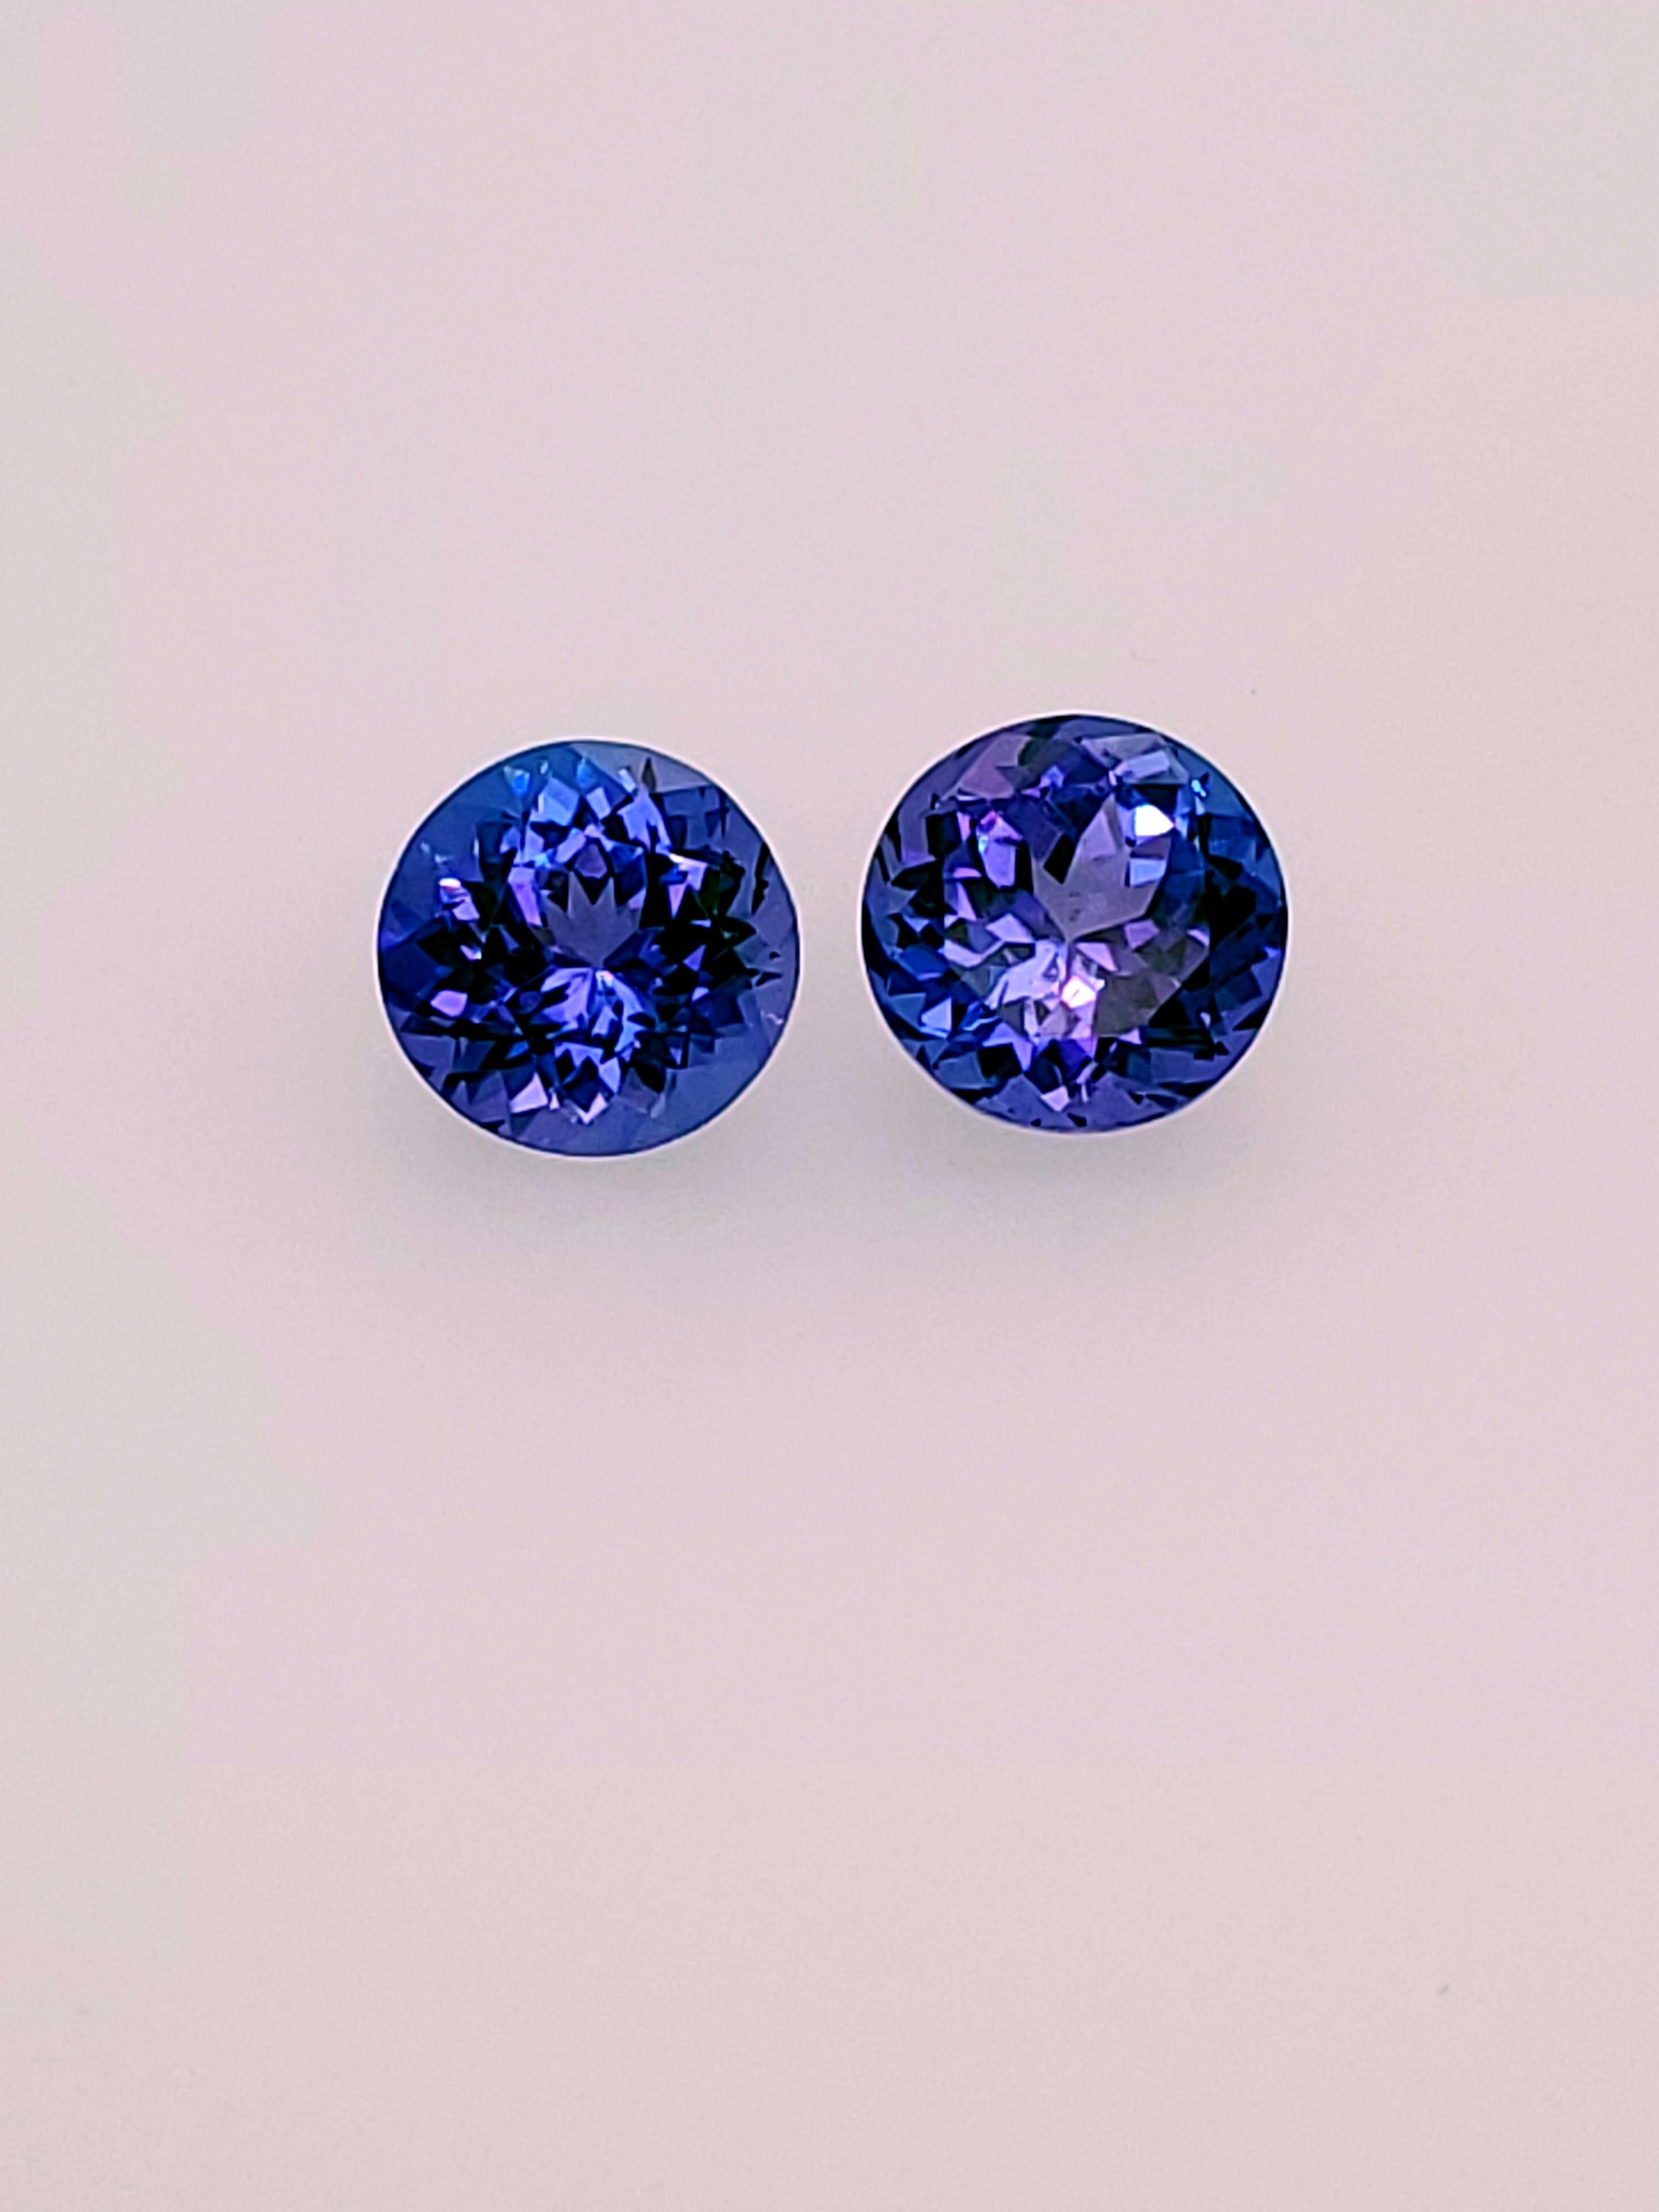 The title says it all!   Matched Pair of Glowing Blue 8mm Tanzanites - weighing 4.26ct.  We looked and examined a large number of 8mm Round Tanzanites looking for a really good matched pair.  It is not easy, especially with Tanzanite!   For a good